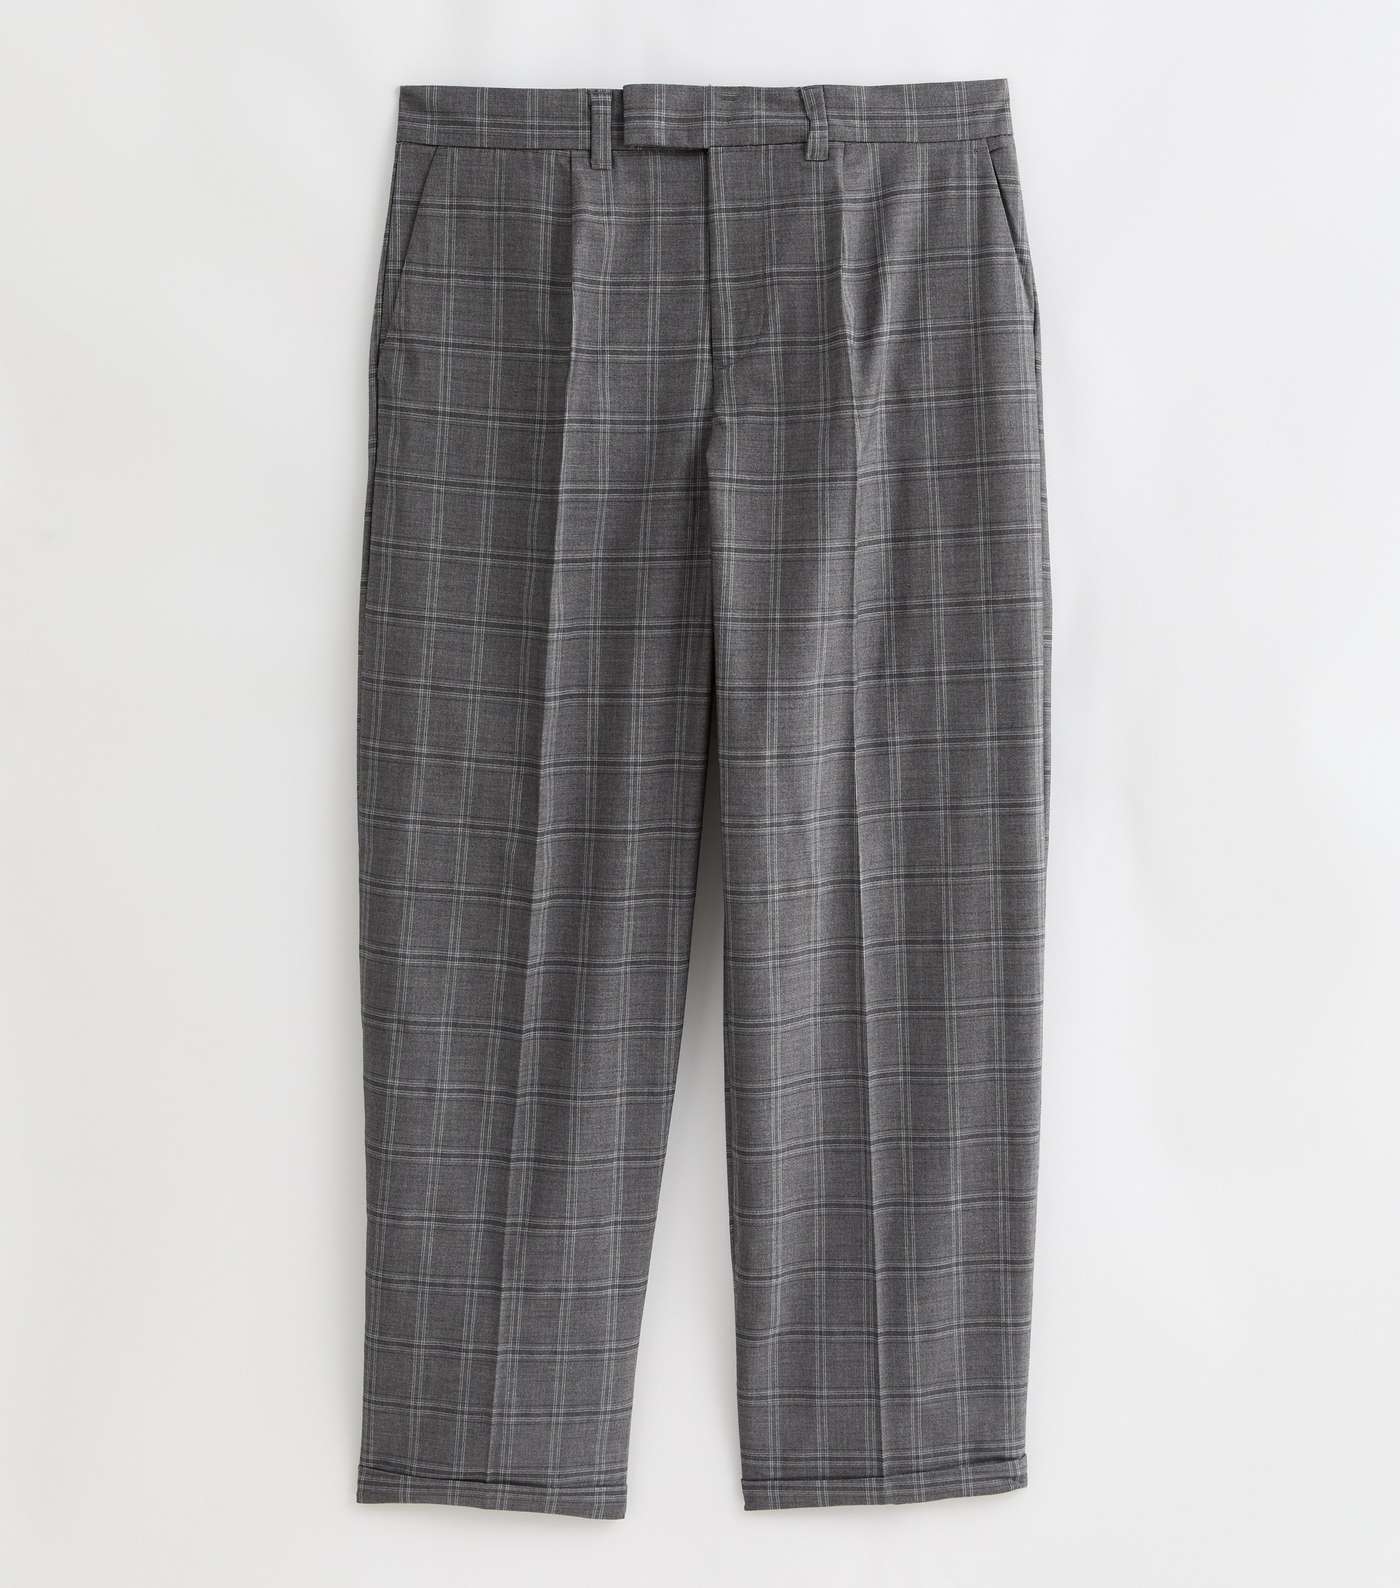 Dark Grey Check Relaxed Fit Trousers